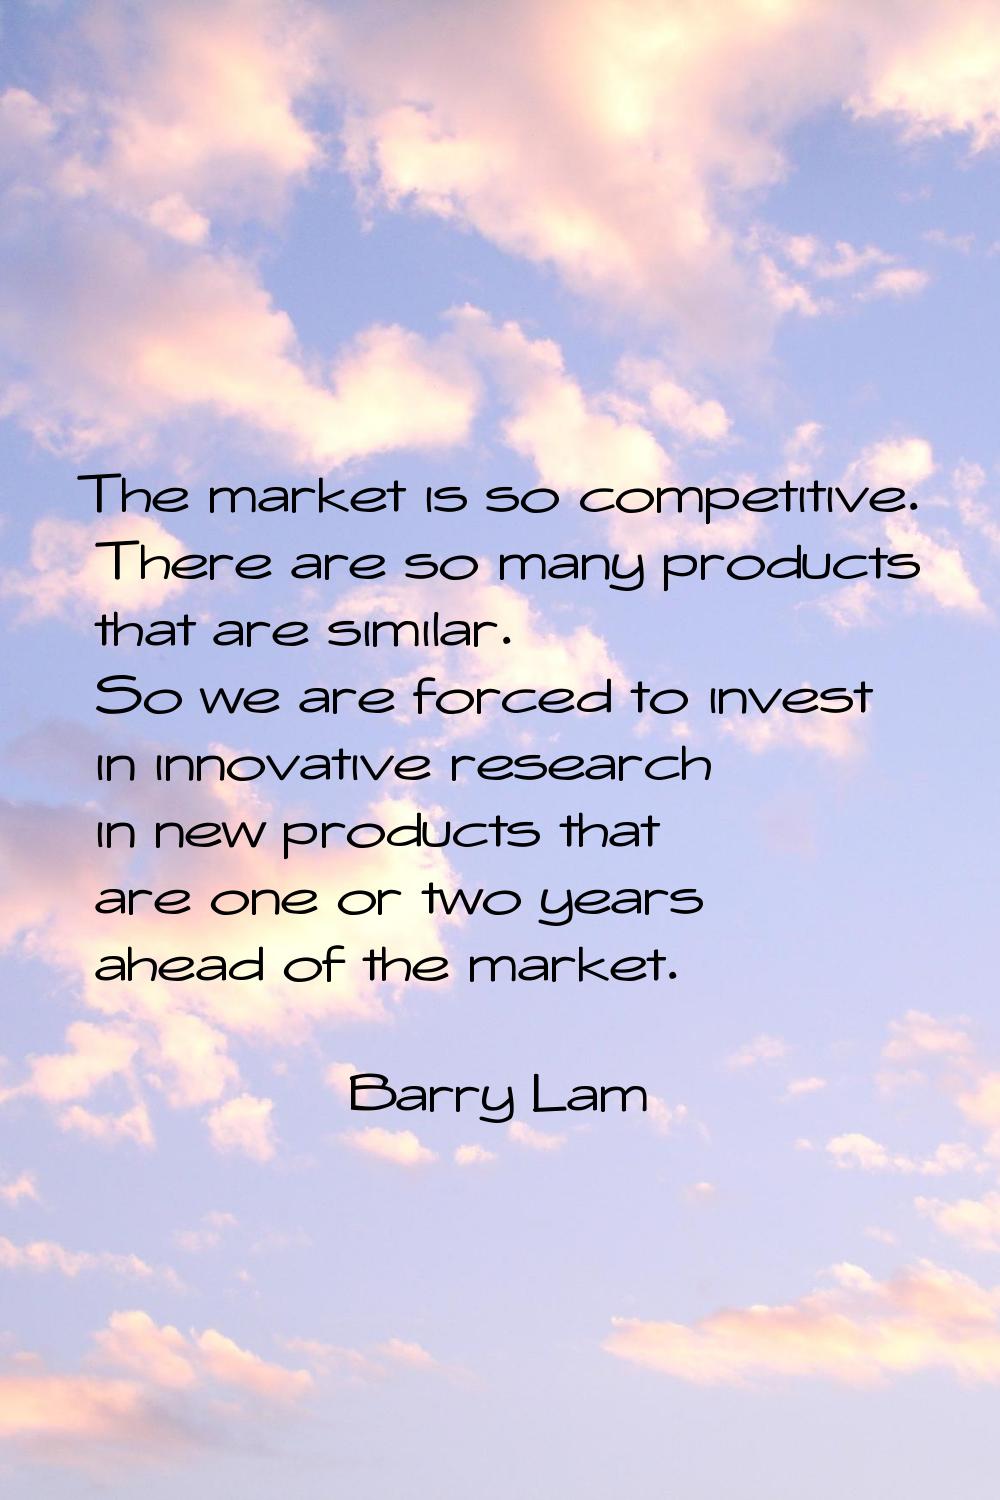 The market is so competitive. There are so many products that are similar. So we are forced to inve